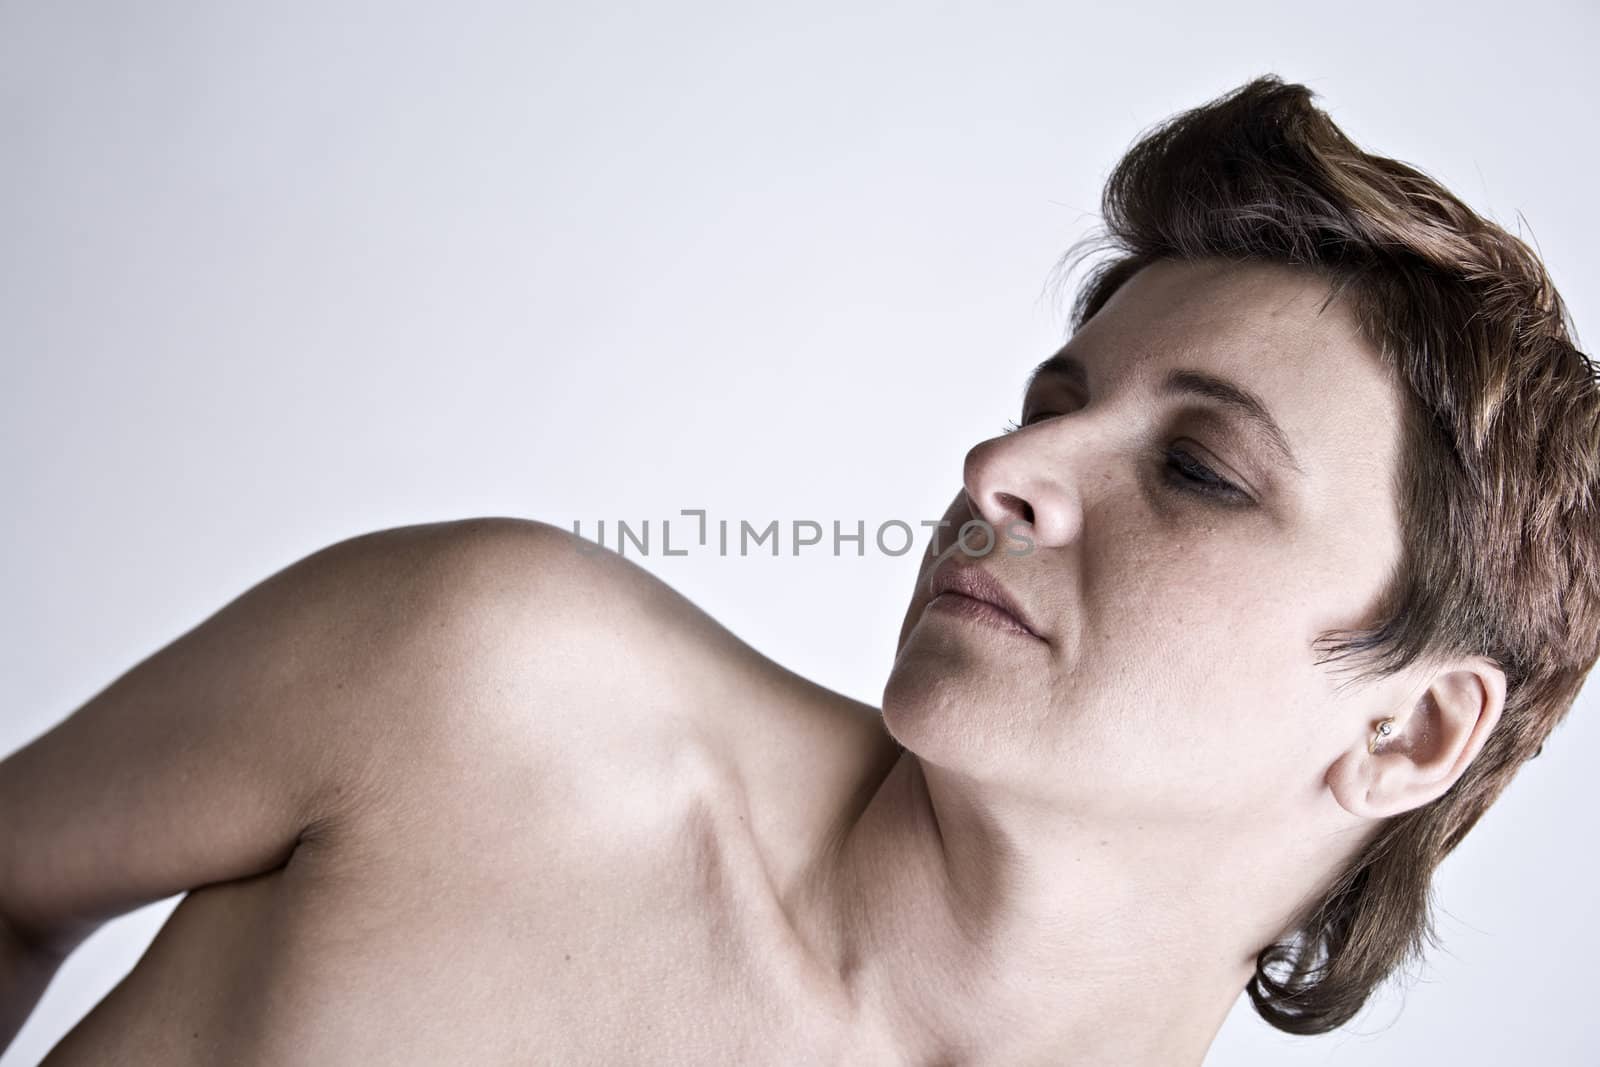 Adult woman portraits taken in the photo studio on a white background